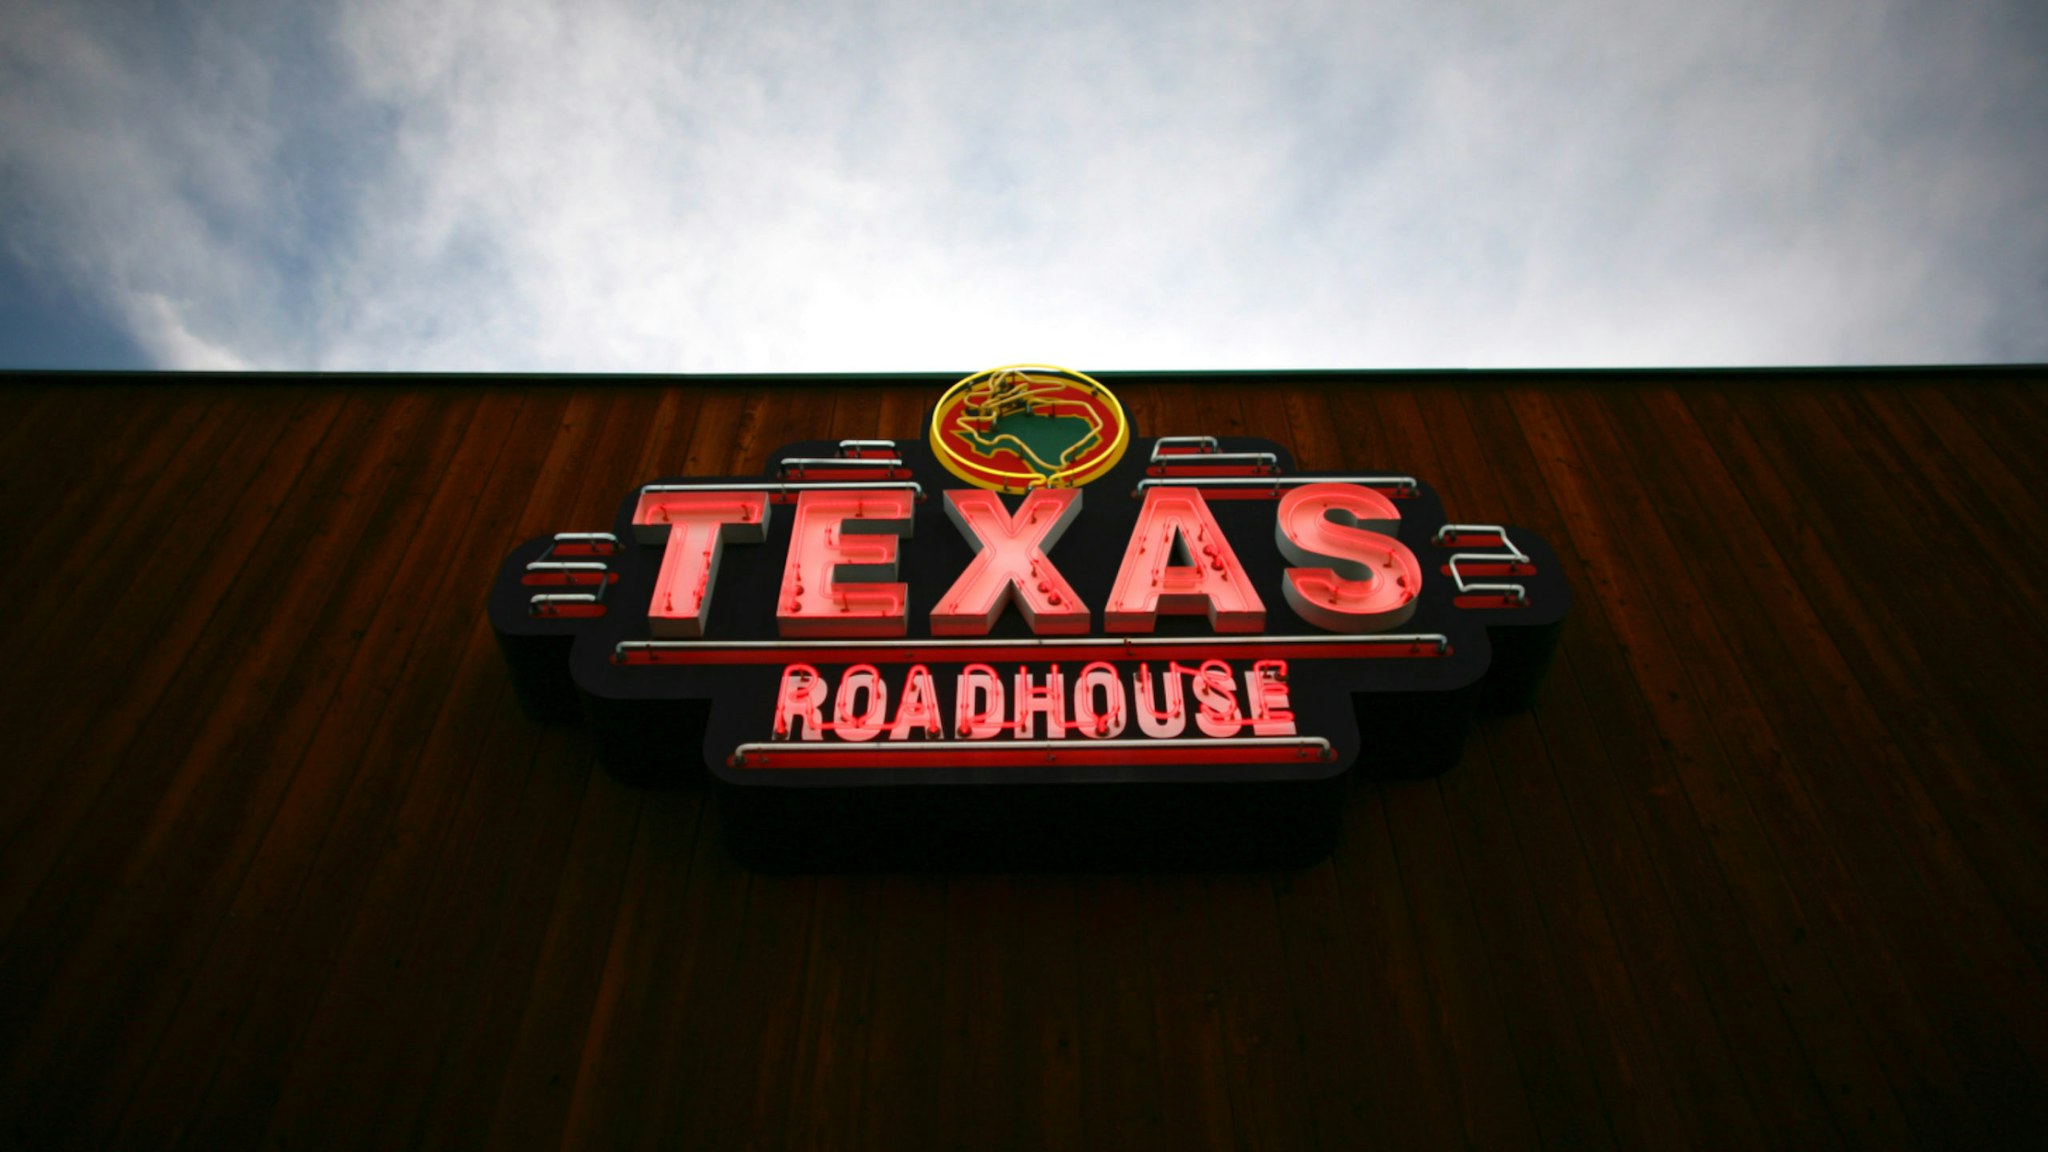 Texas Roadhouse Inc. signage is displayed outside of a restaurant in Arvada, Colorado, U.S., on Friday, March 11, 2011.